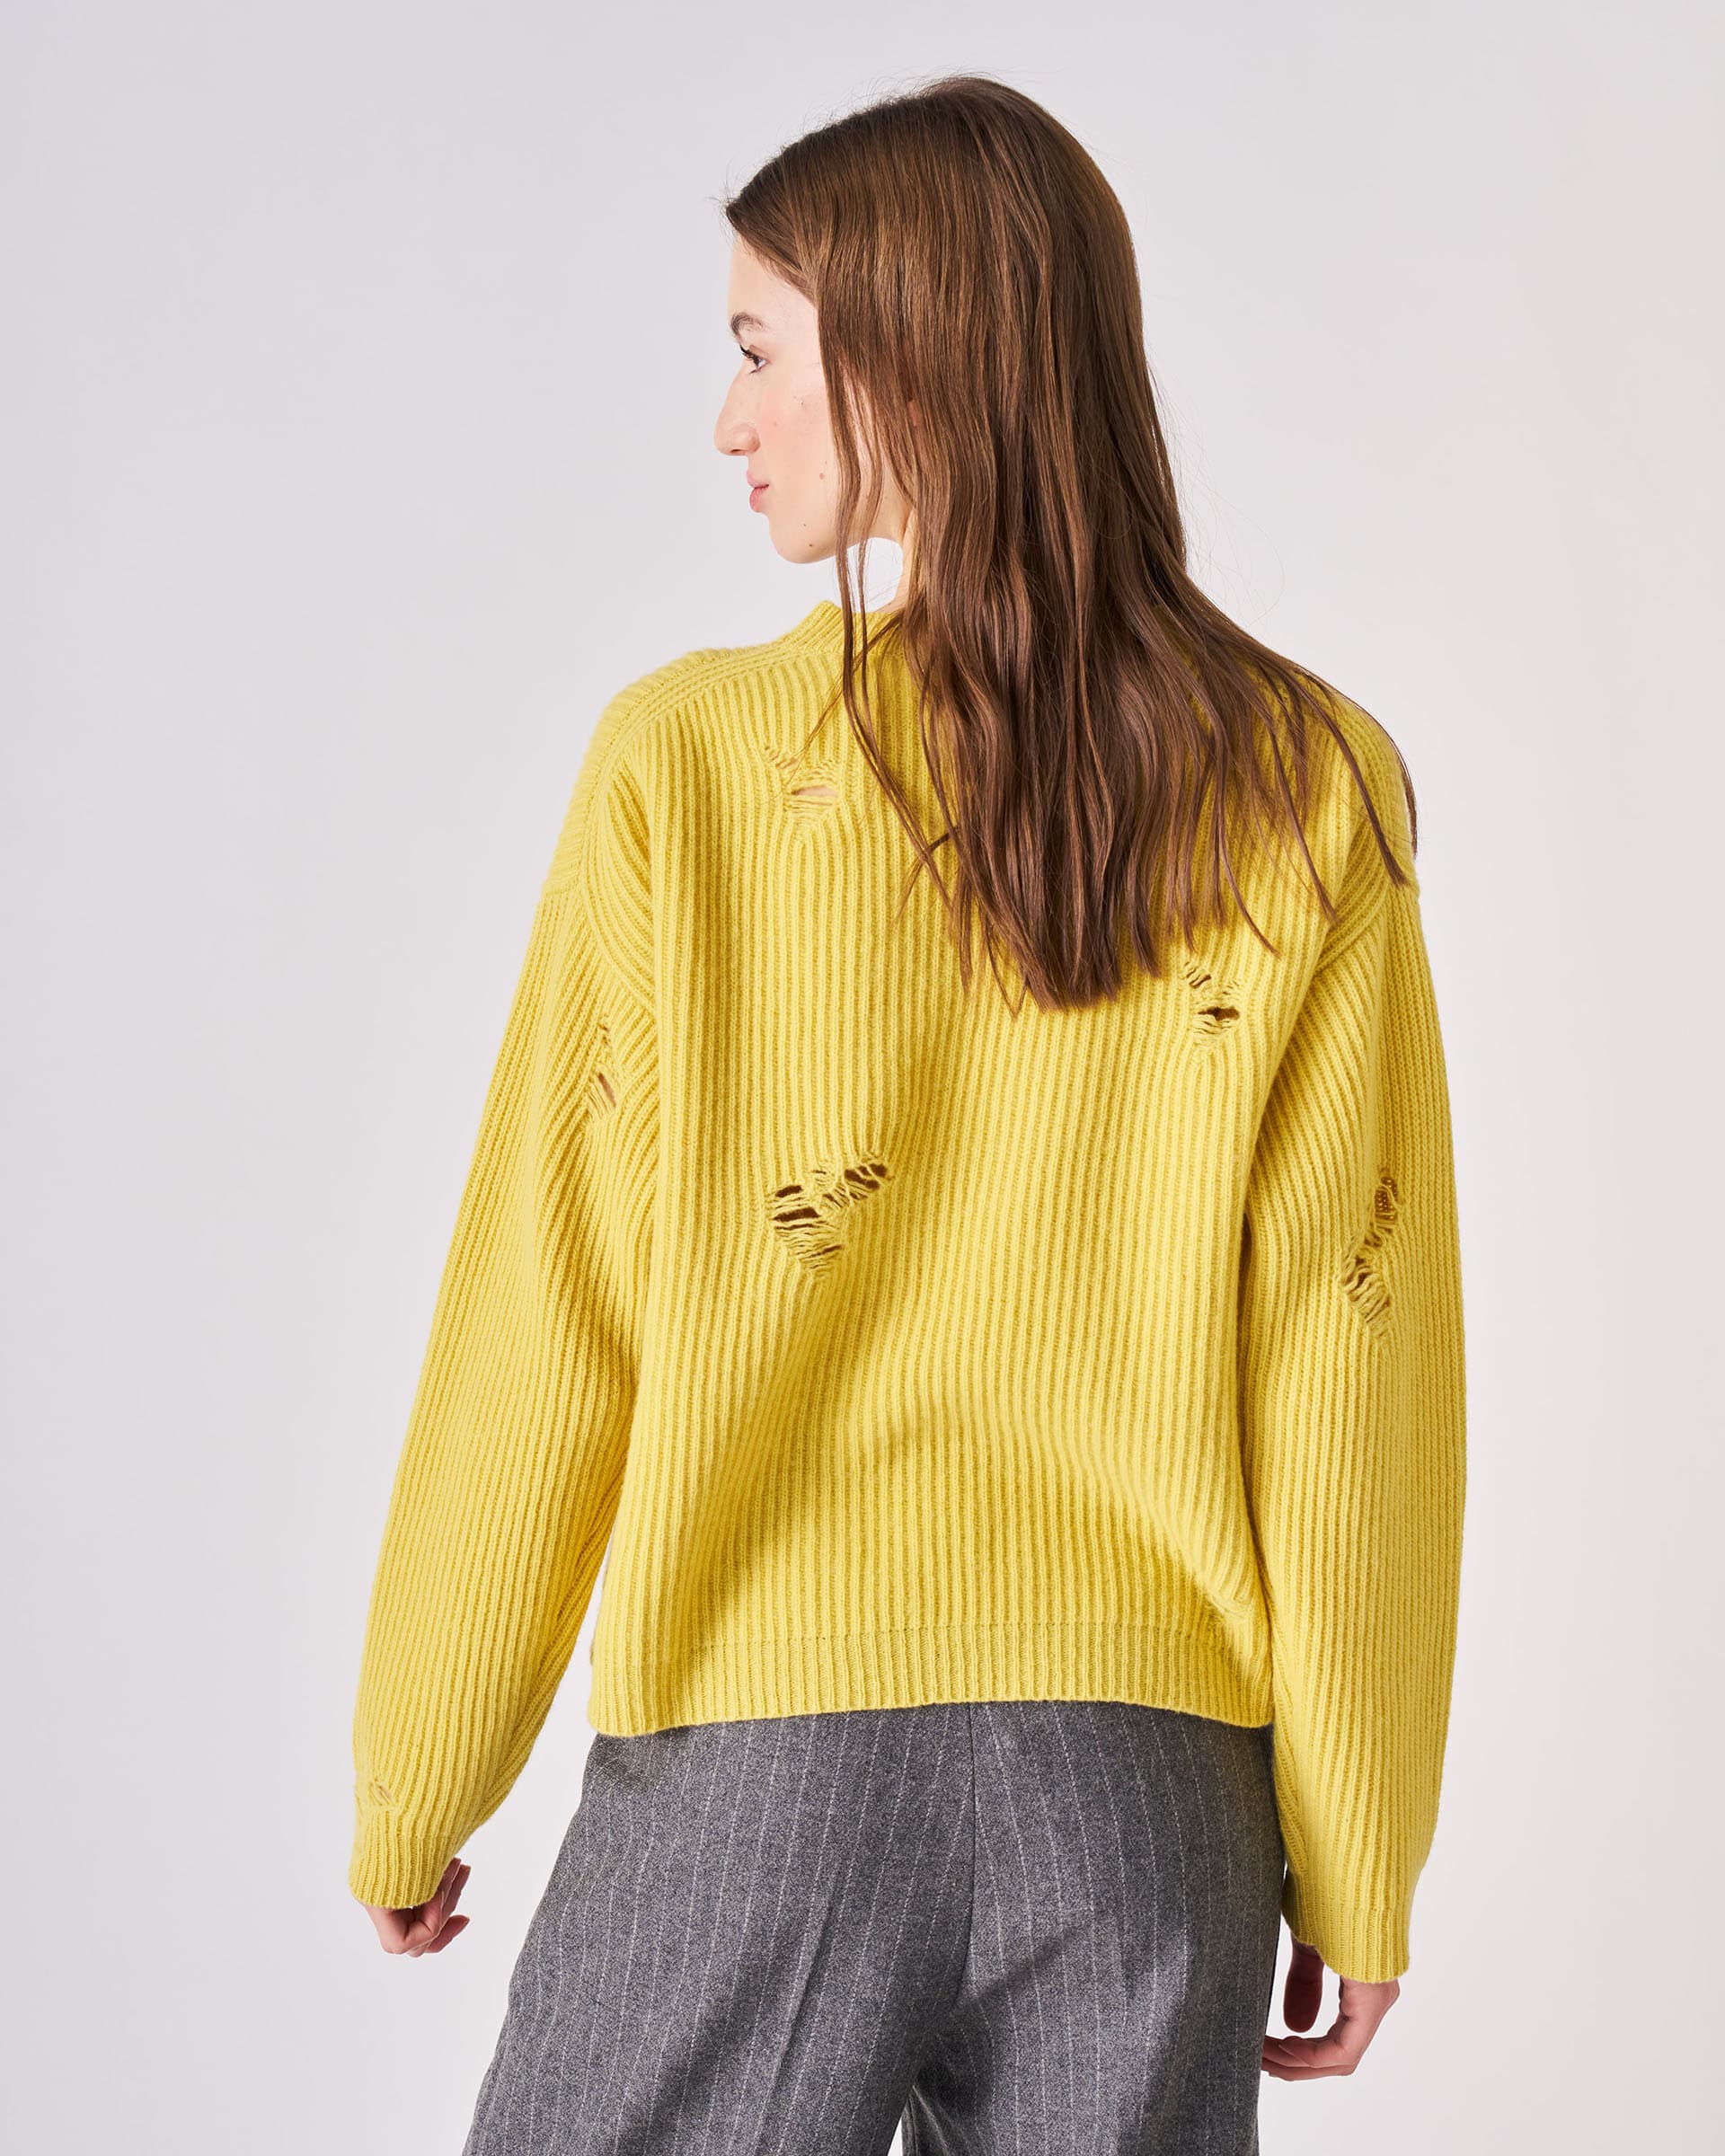 The Market Store | Boxy Sweater With Holes